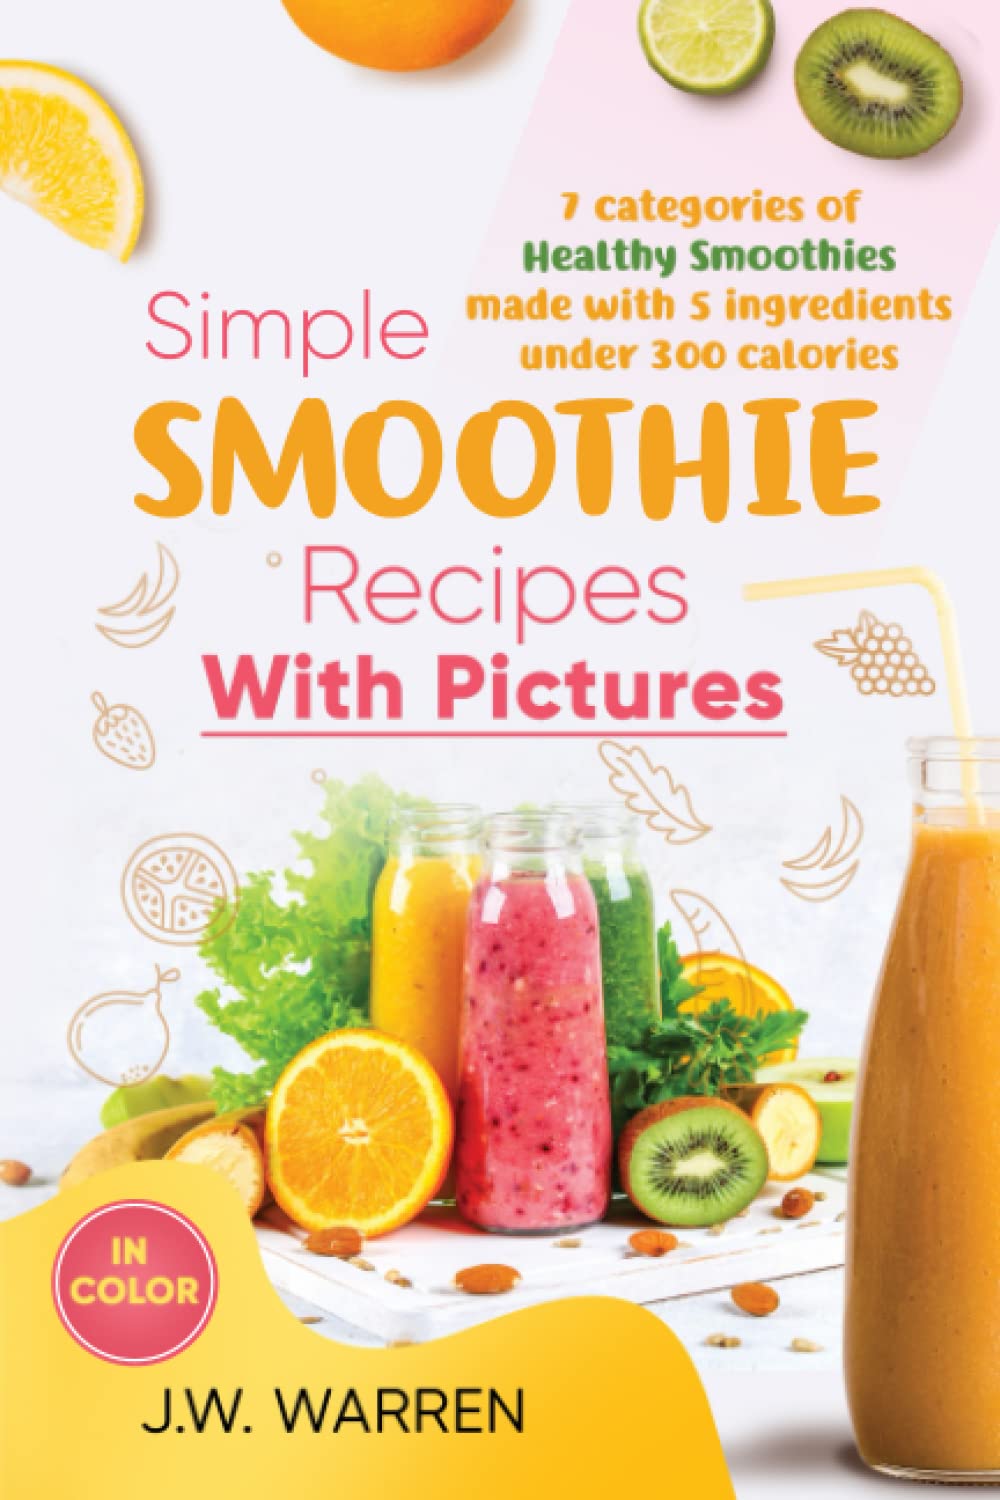 Simple Smoothie Recipes With Pictures: 7 categories of healthy smoothies made with 5 ingredients under 300 calories